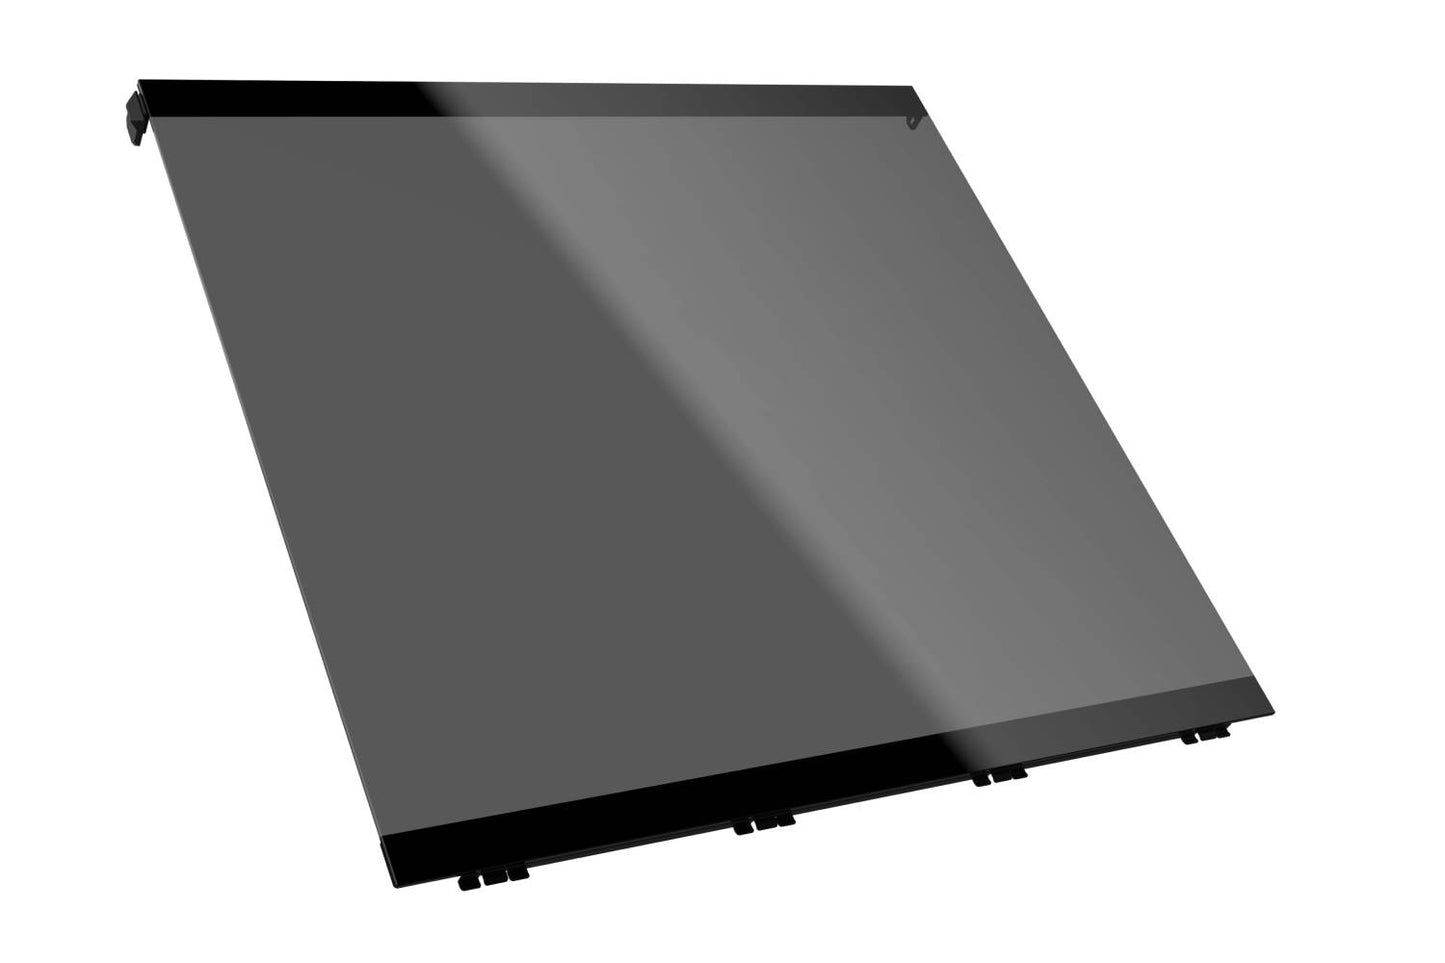 Tempered Glass Side Panel – Dark Tinted TG Type A